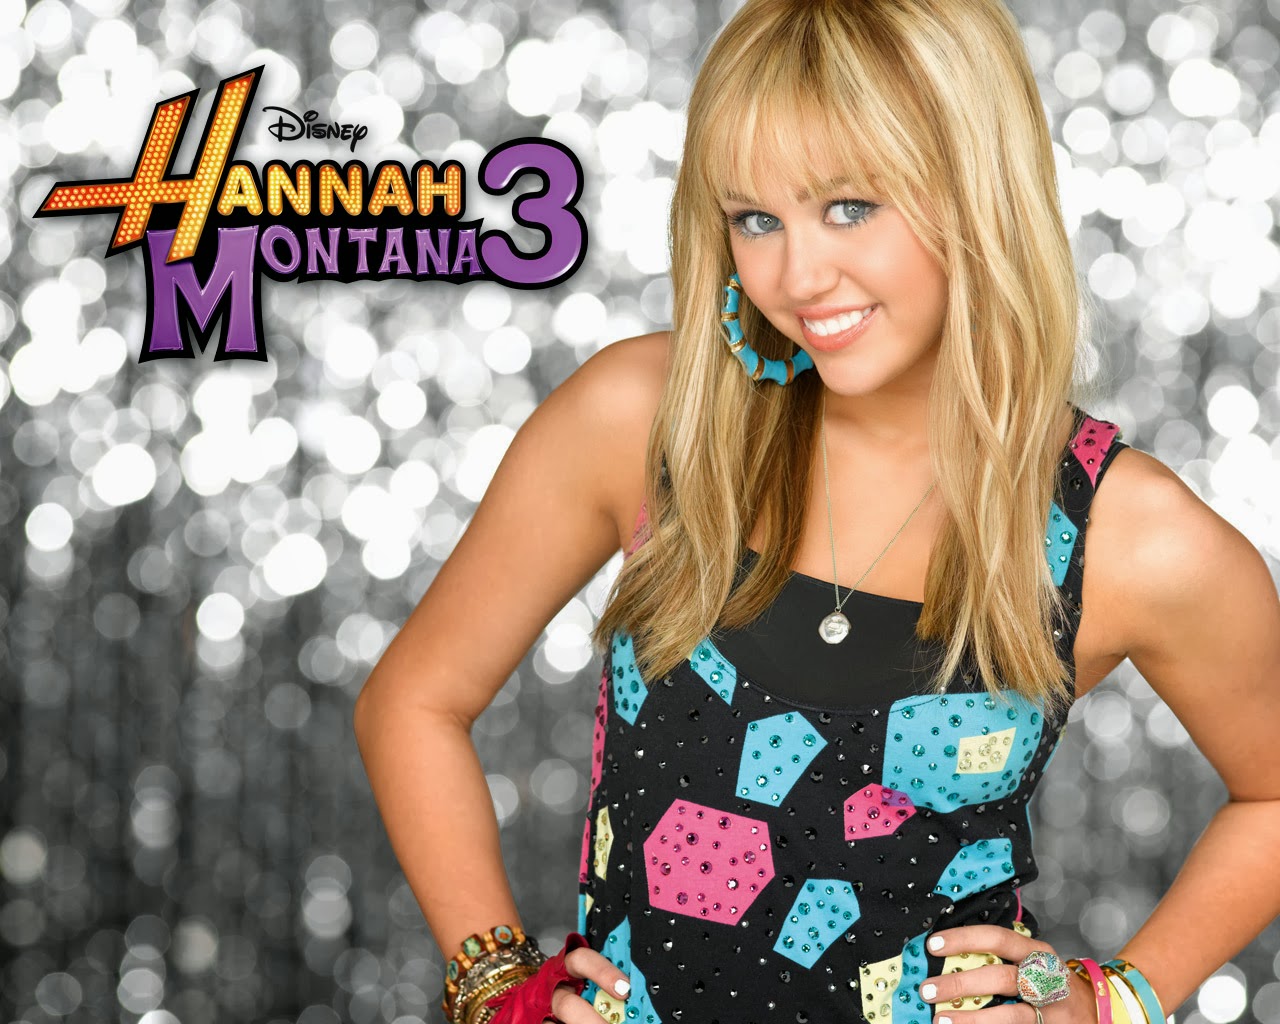 Hannah Montana Lamenting the loss of the "non-innocence" of youth